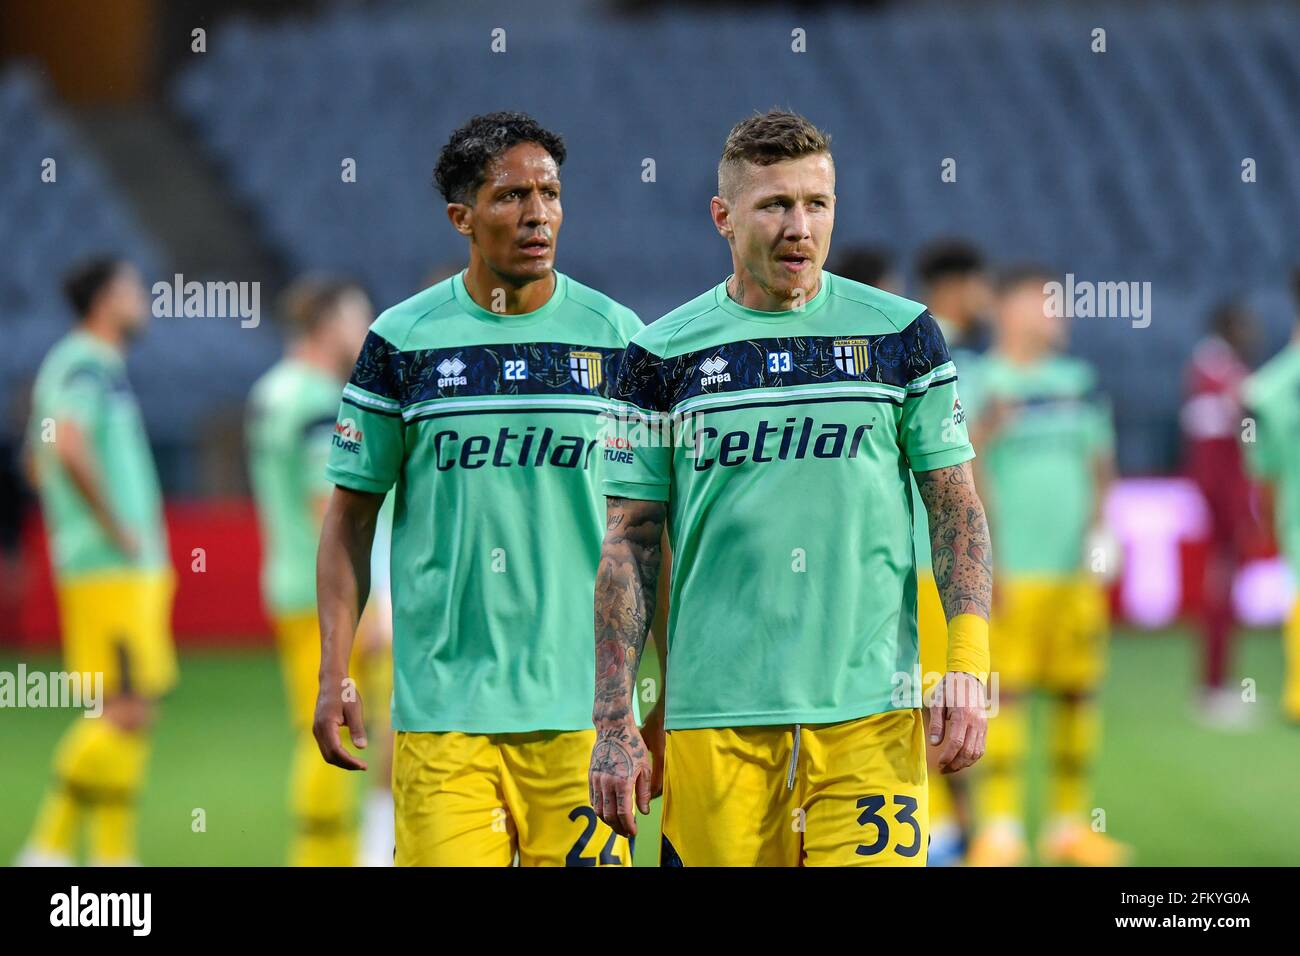 Turin, Italy. 3rd, May 2021. Bruno Alves (22) and Juraj Kucka (33) of Parma Calcio seen during warm up before the Serie A match between Torino FC and Parma Calcio at Stadio Grande Torino in Turin, Italy. (Photo credit: Gonzales Photo - Tommaso Fimiano). Stock Photo